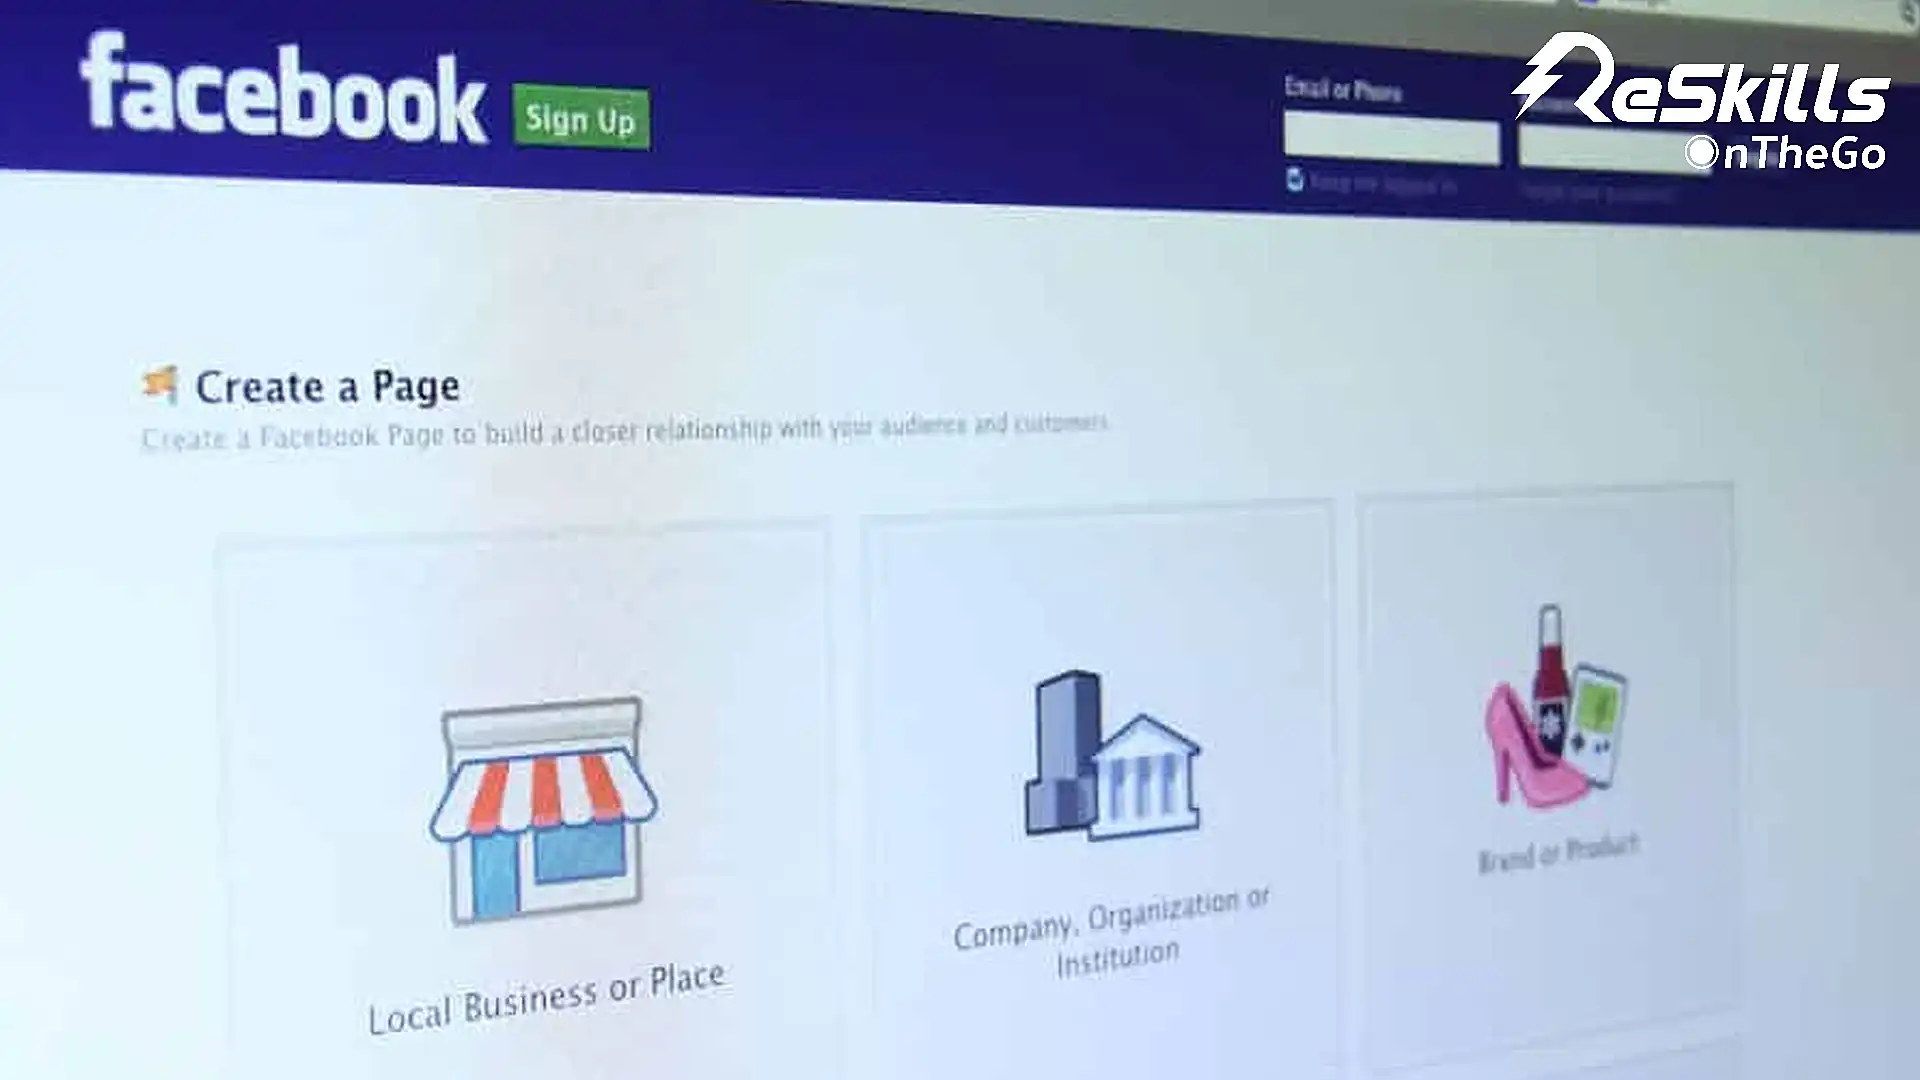 Tackle Facebook Effectively to Upscale Online Business - ReSkills